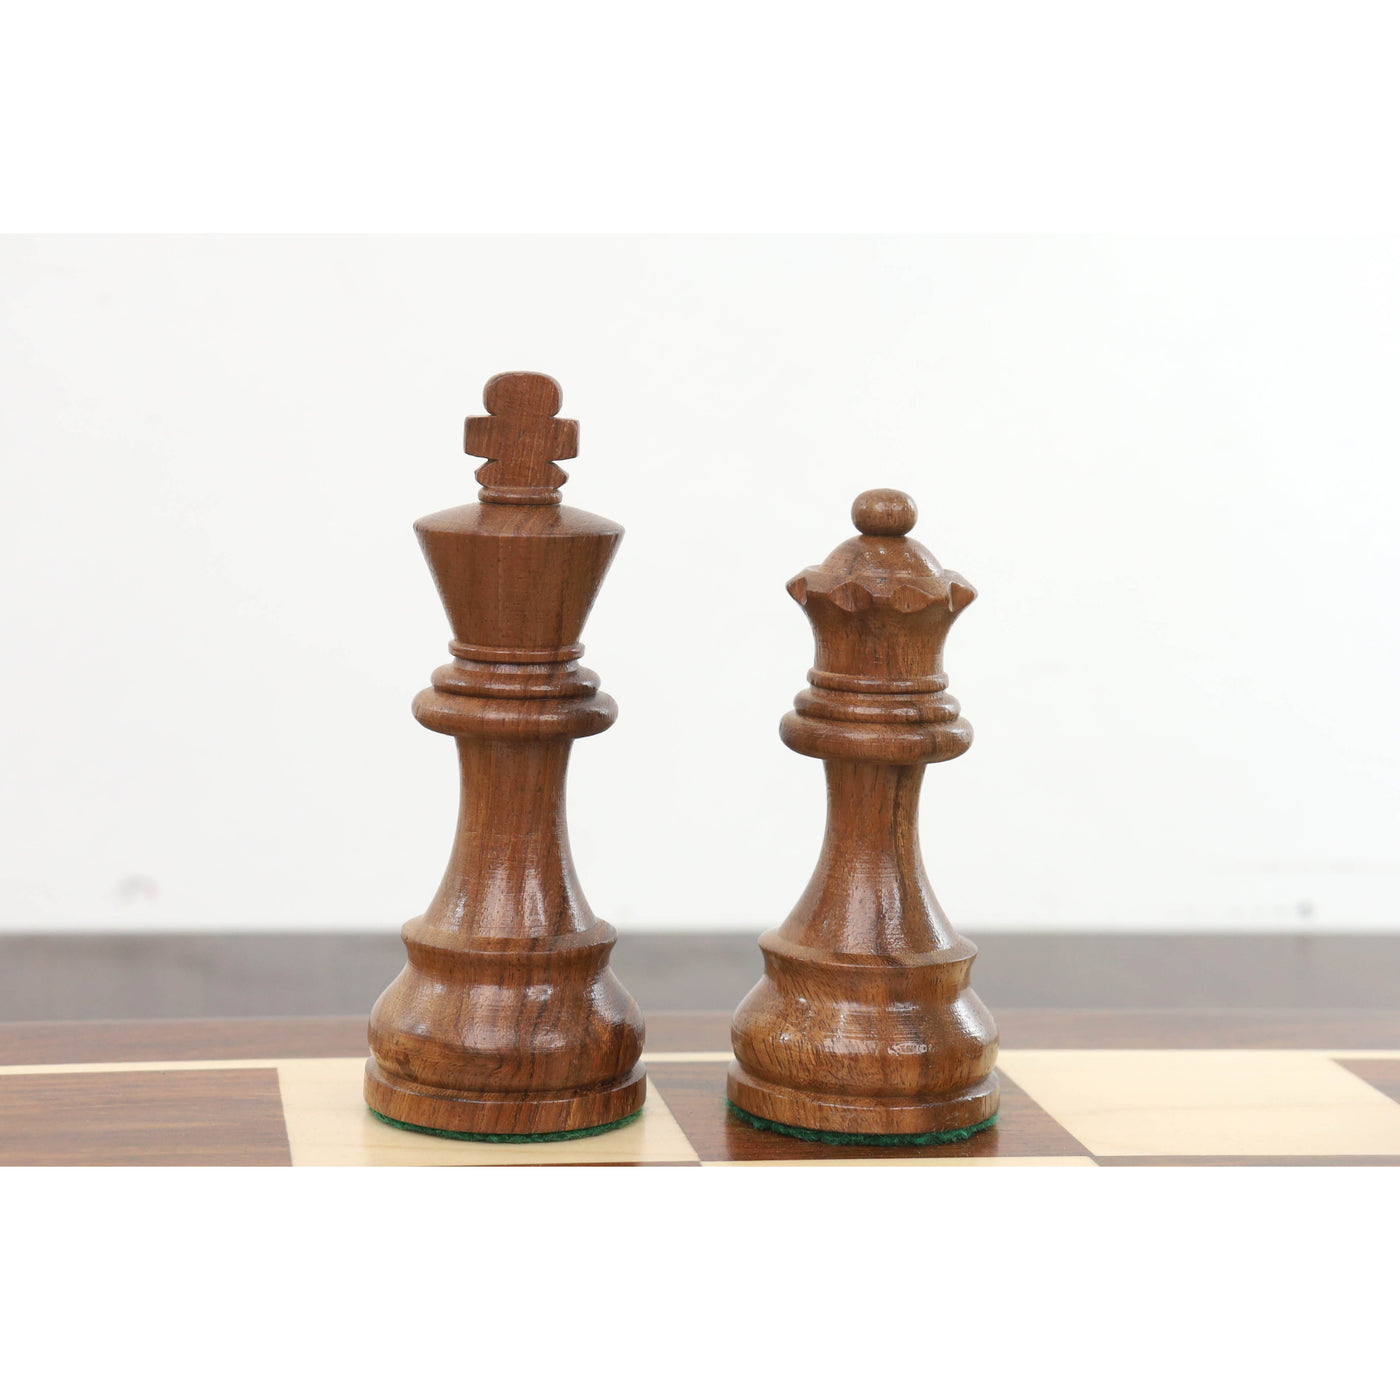 3.9" Tournament Chess Set Combo -Pieces in Golden Rosewood with Board and Box